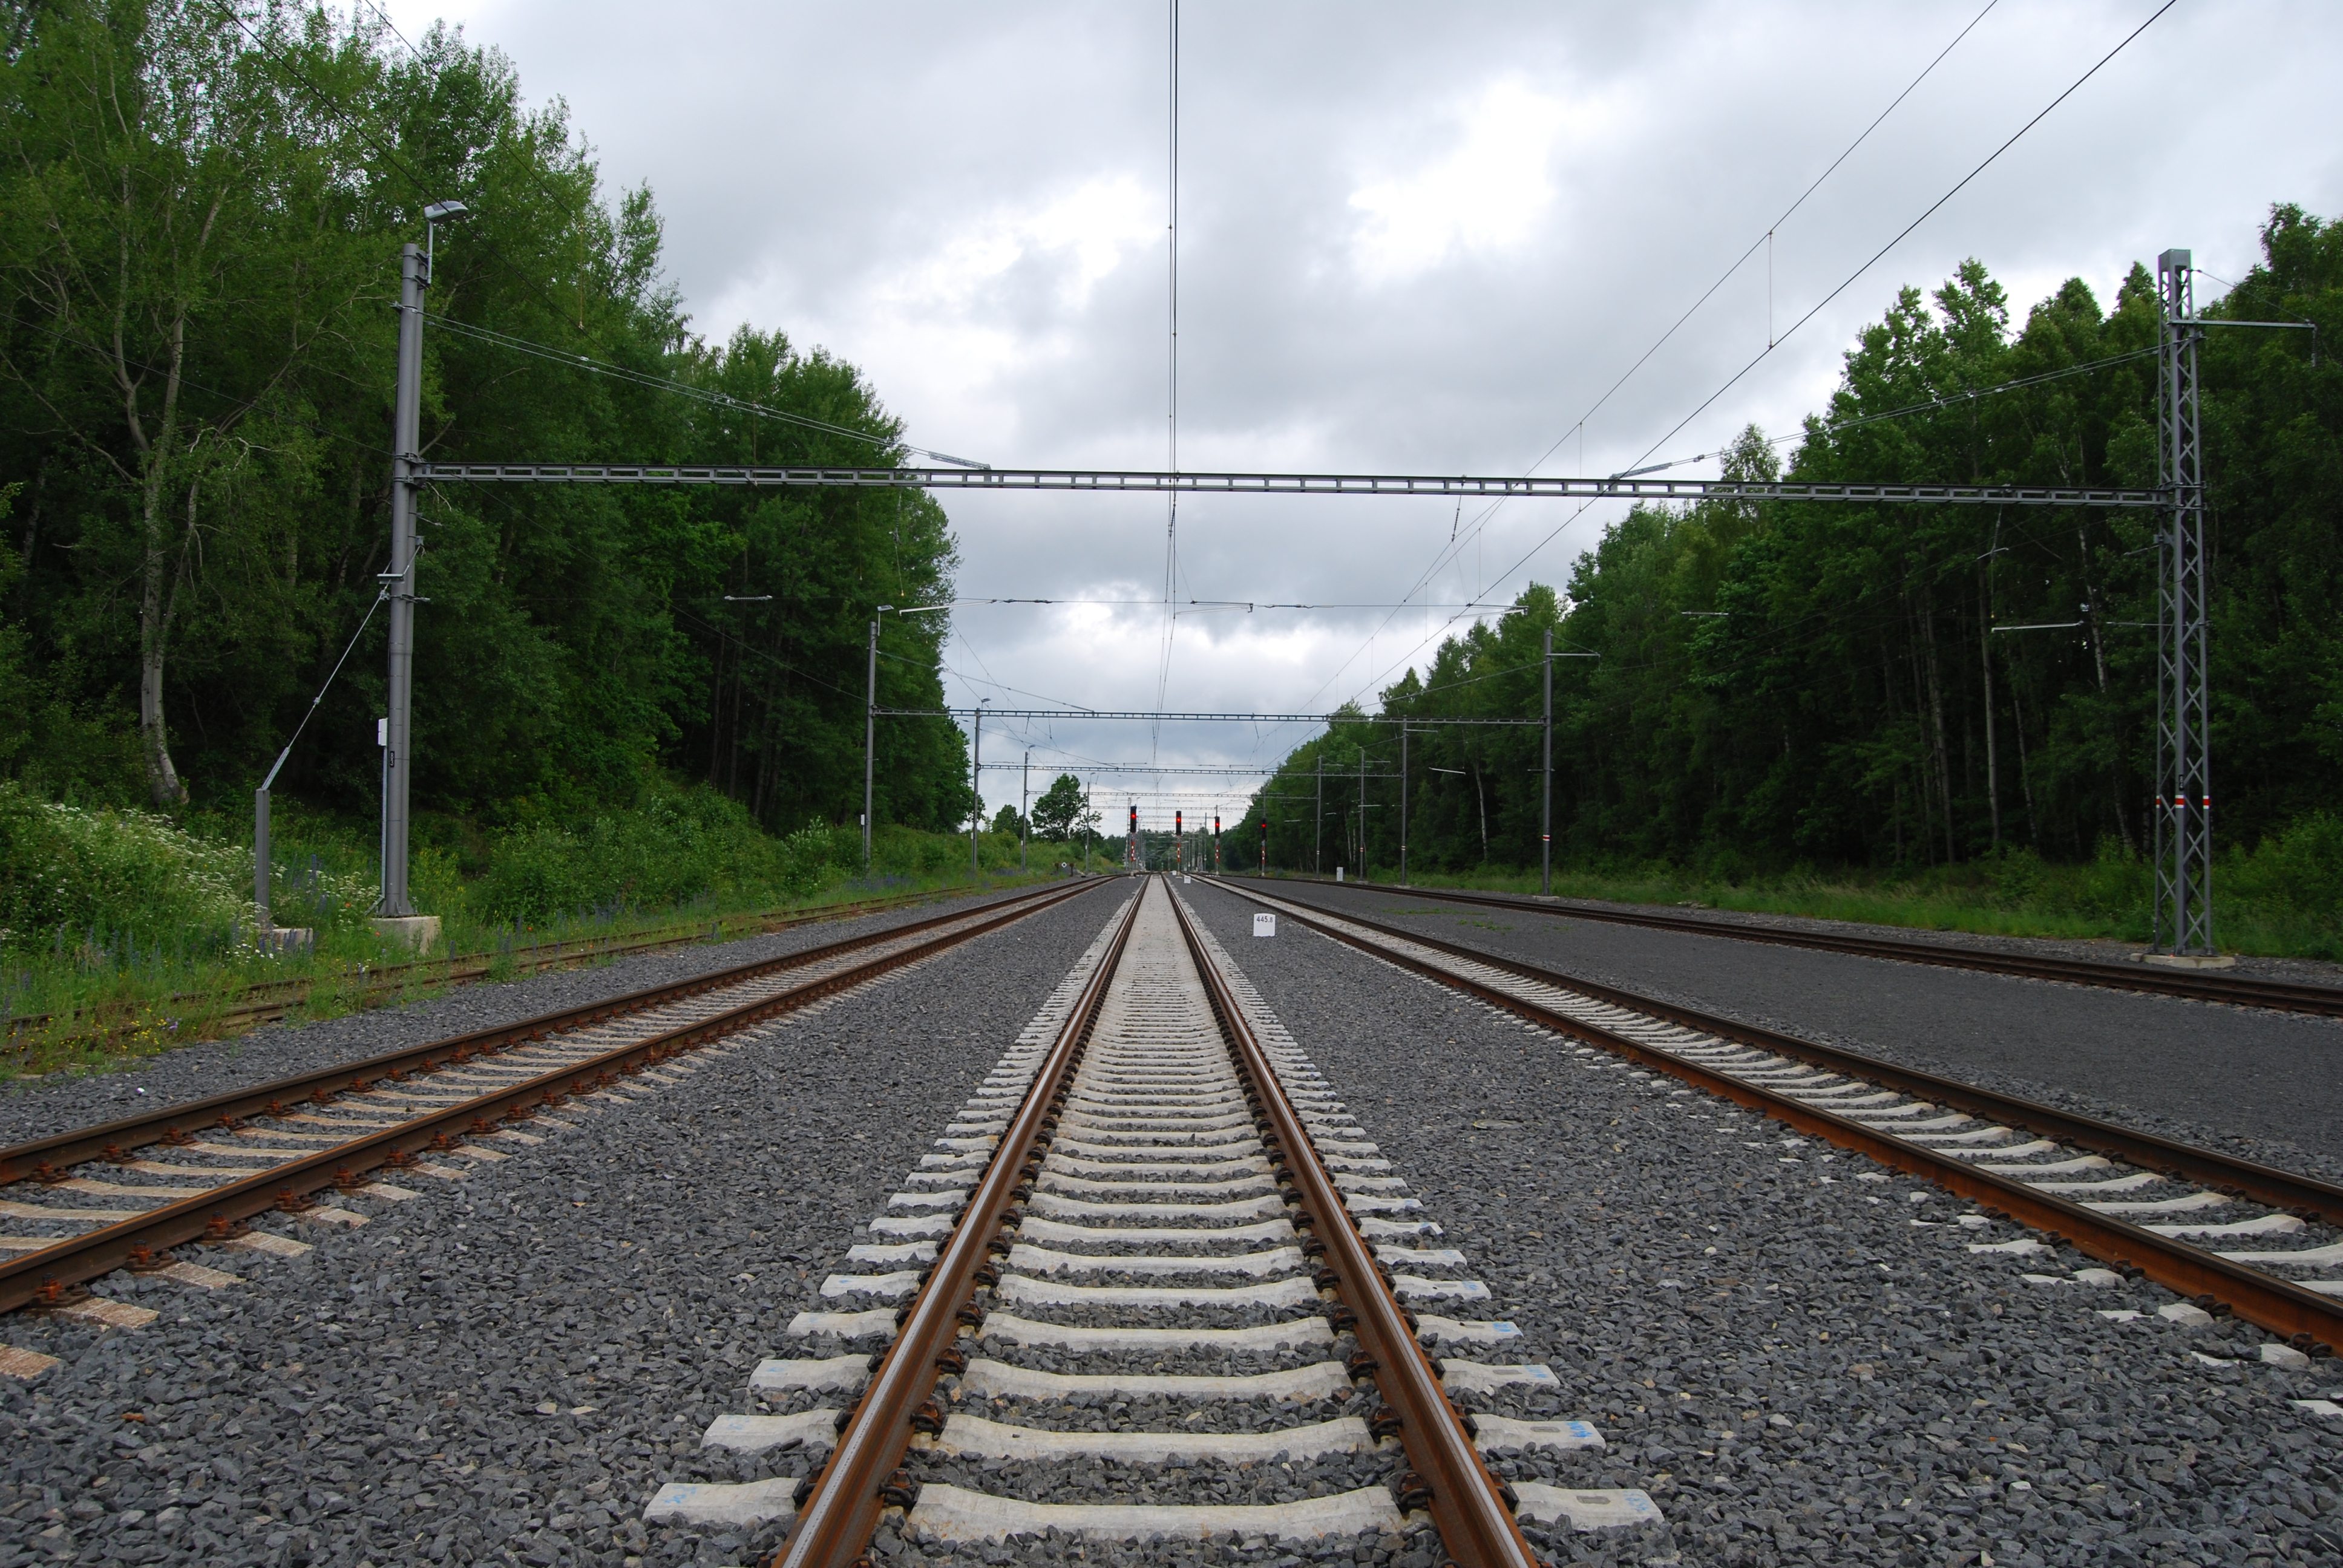 A record budget will enable major rail construction to start in 2023